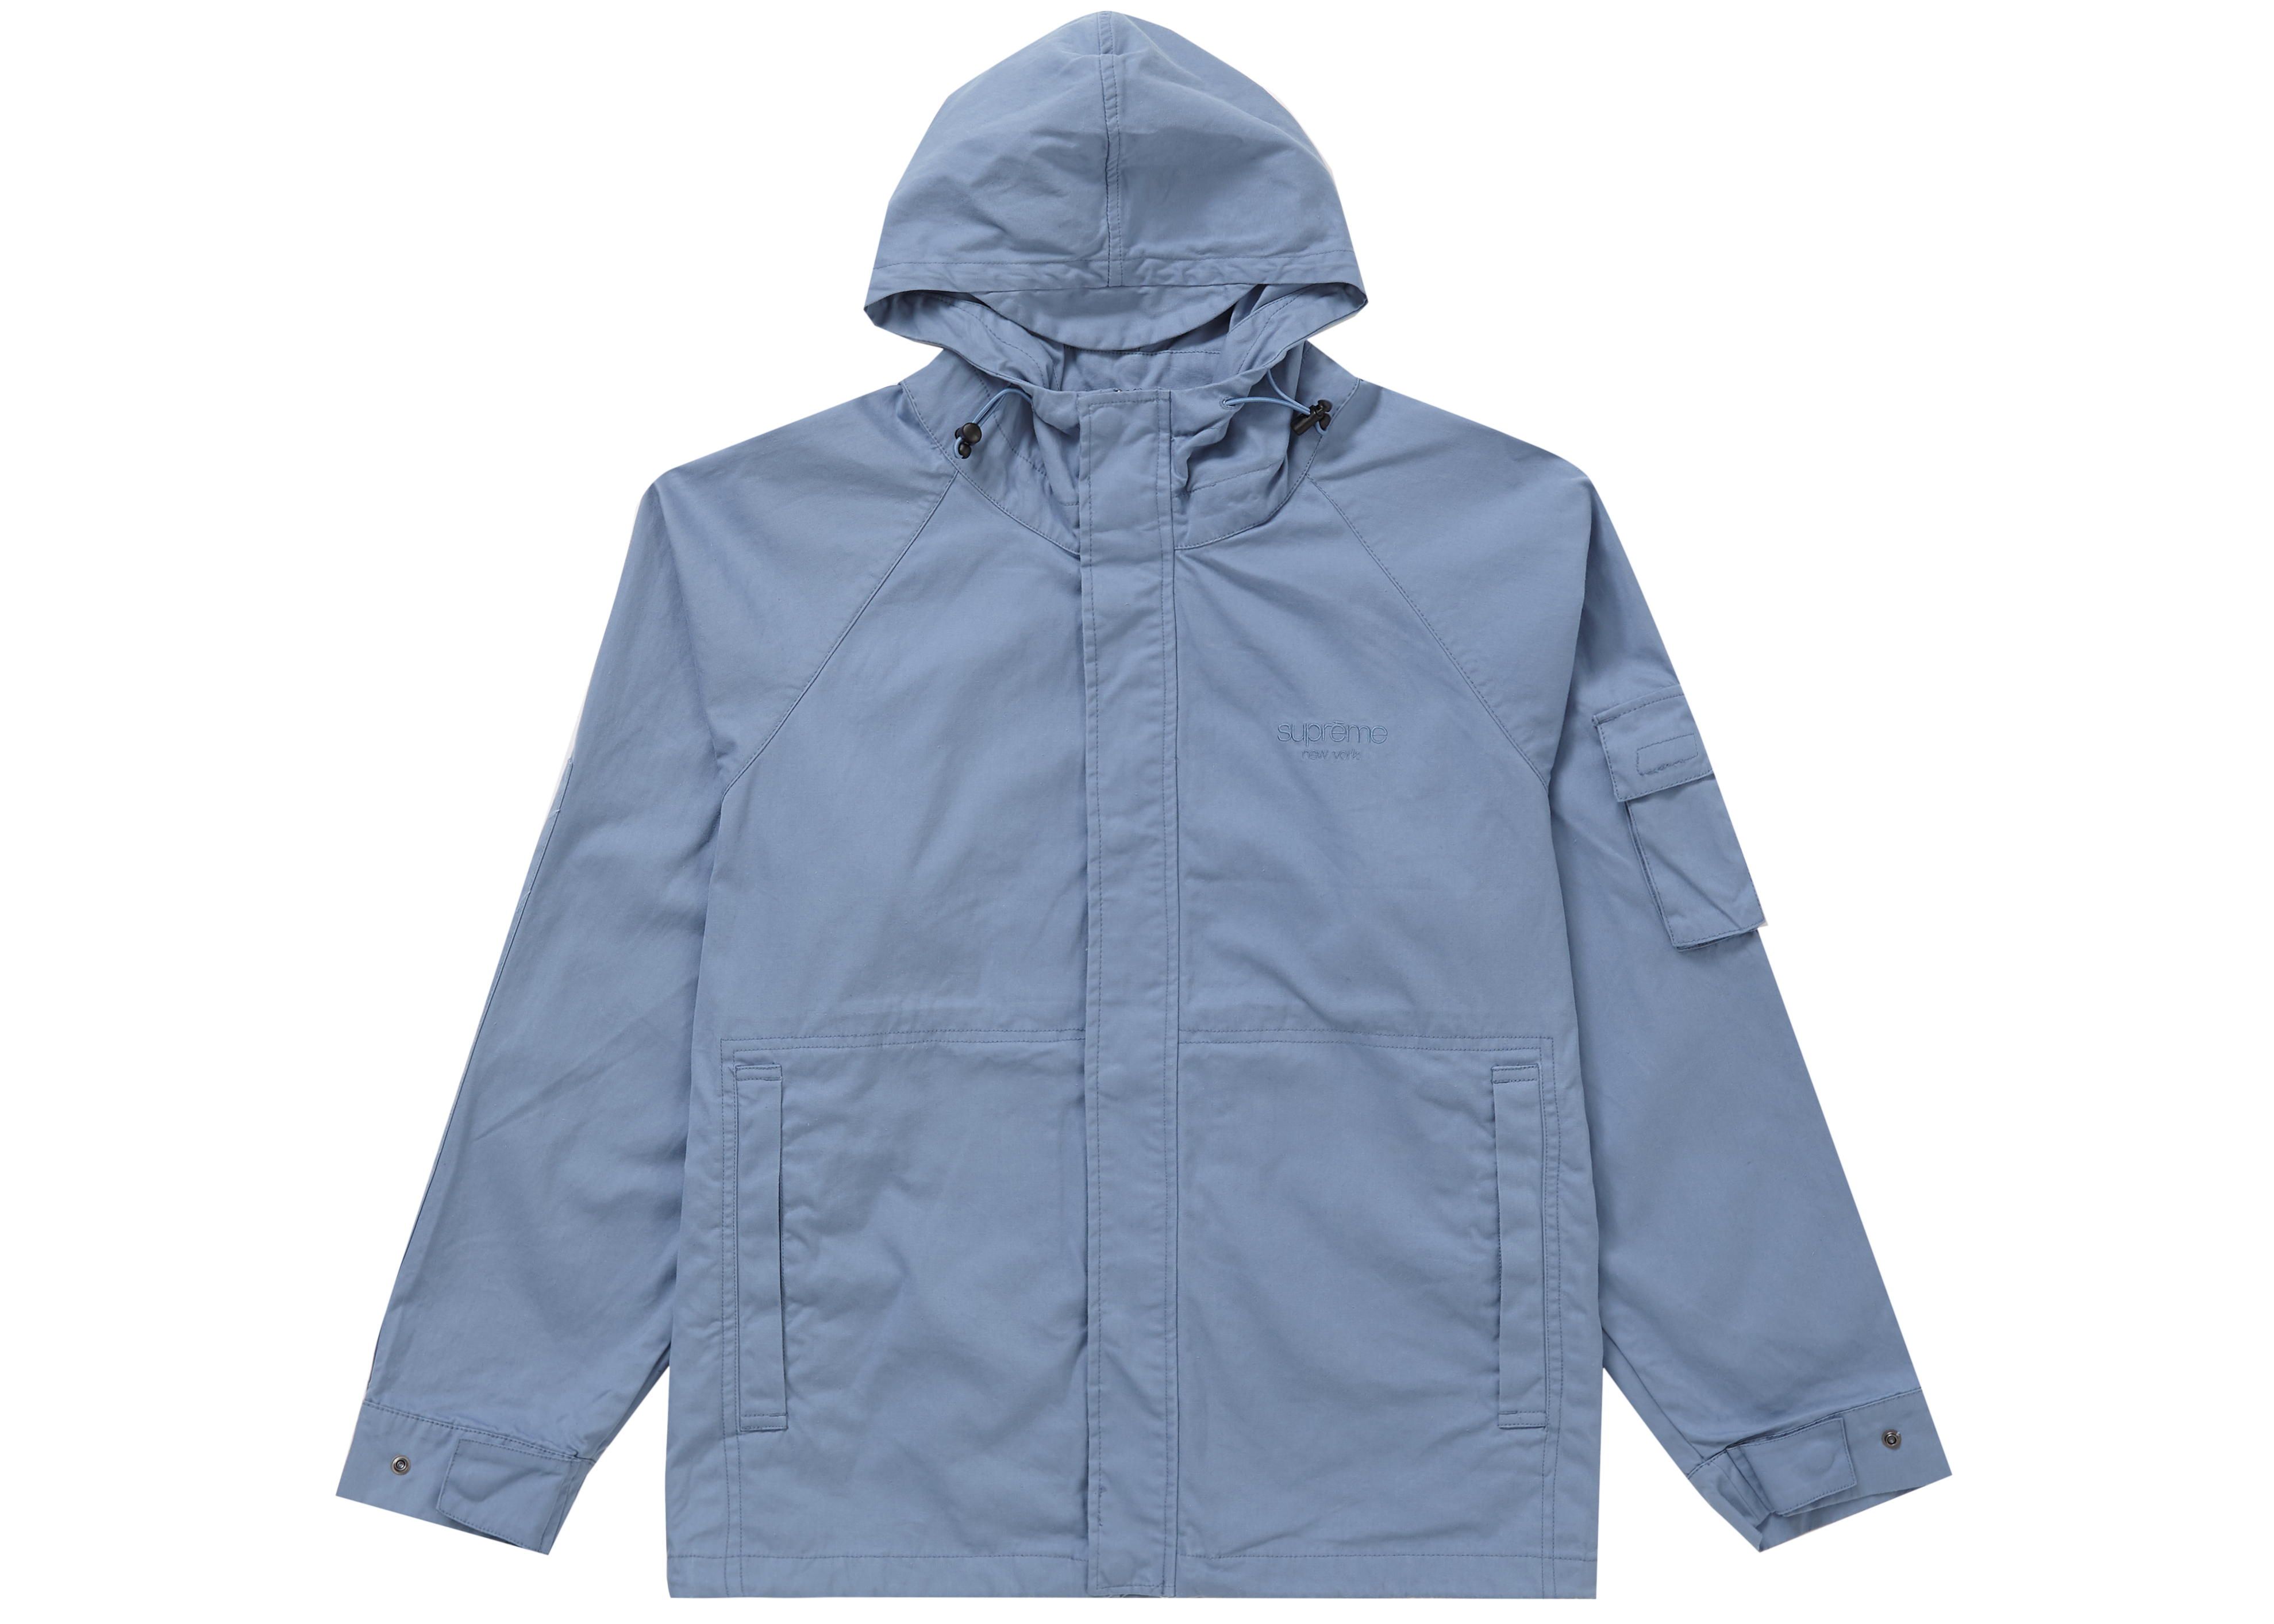 Supreme Cotton Field Jacket   right blue変更致します